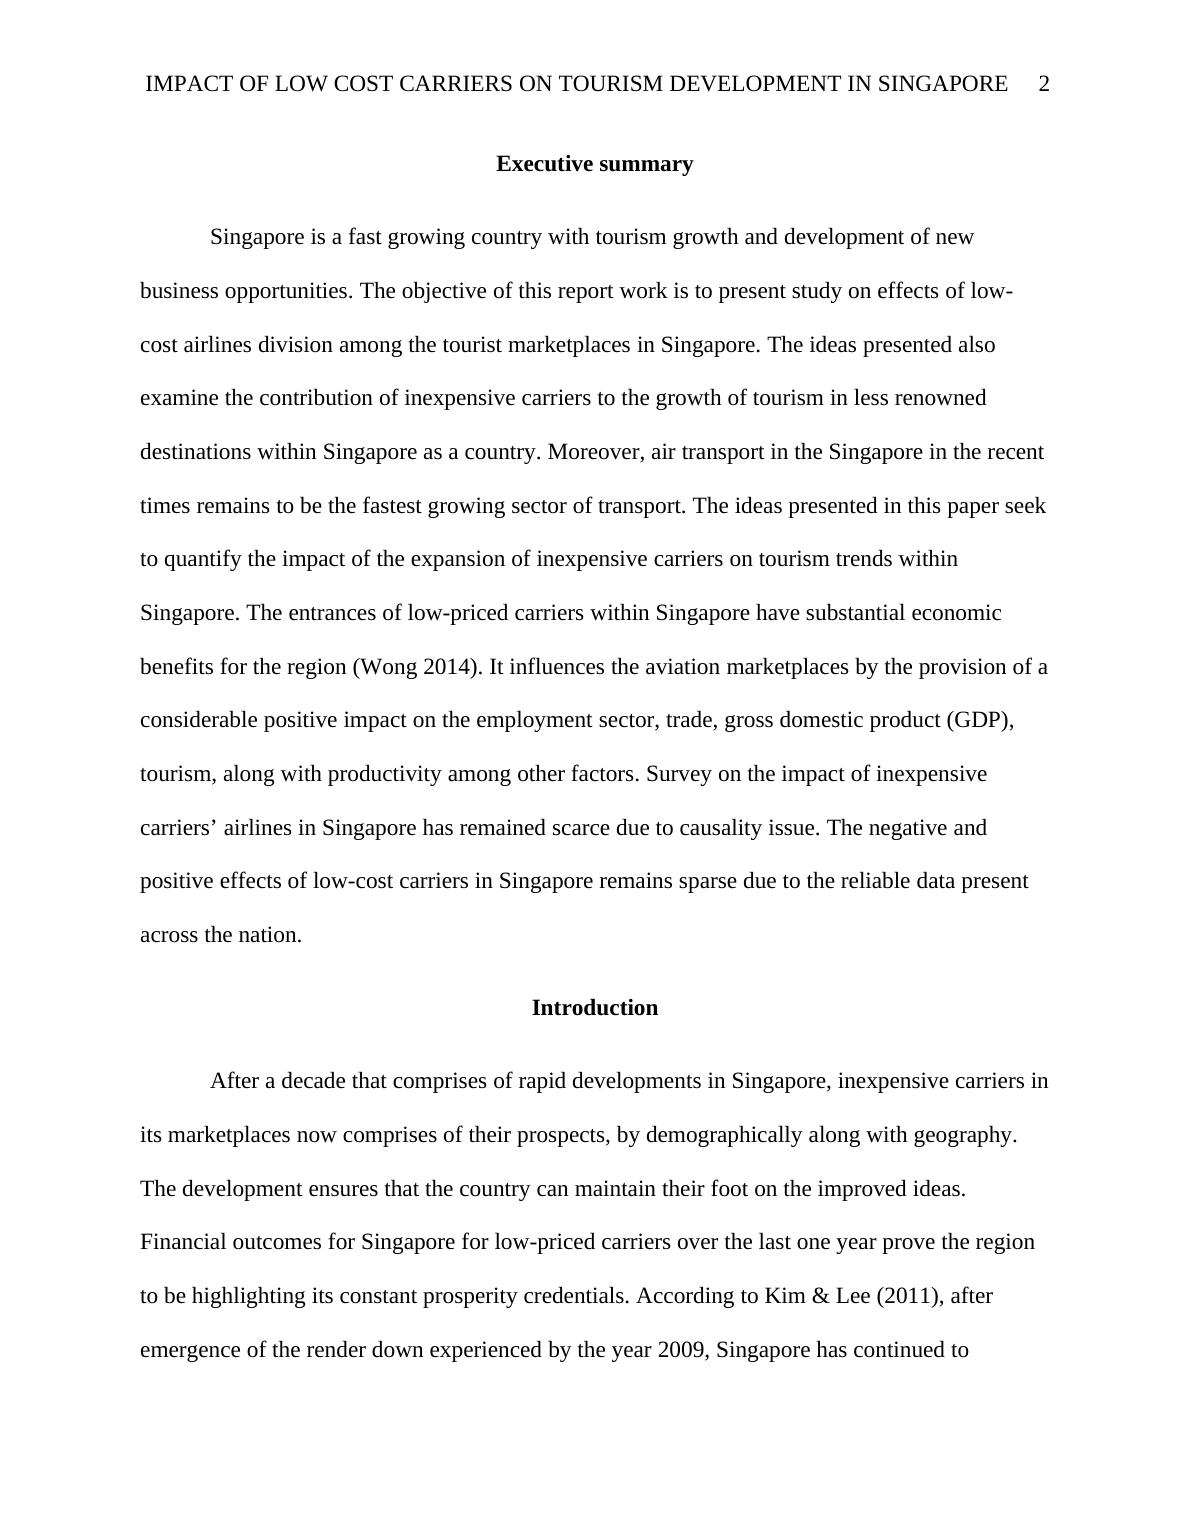 MKT 506 - Report On Tourist Marketplaces in Singapore_2